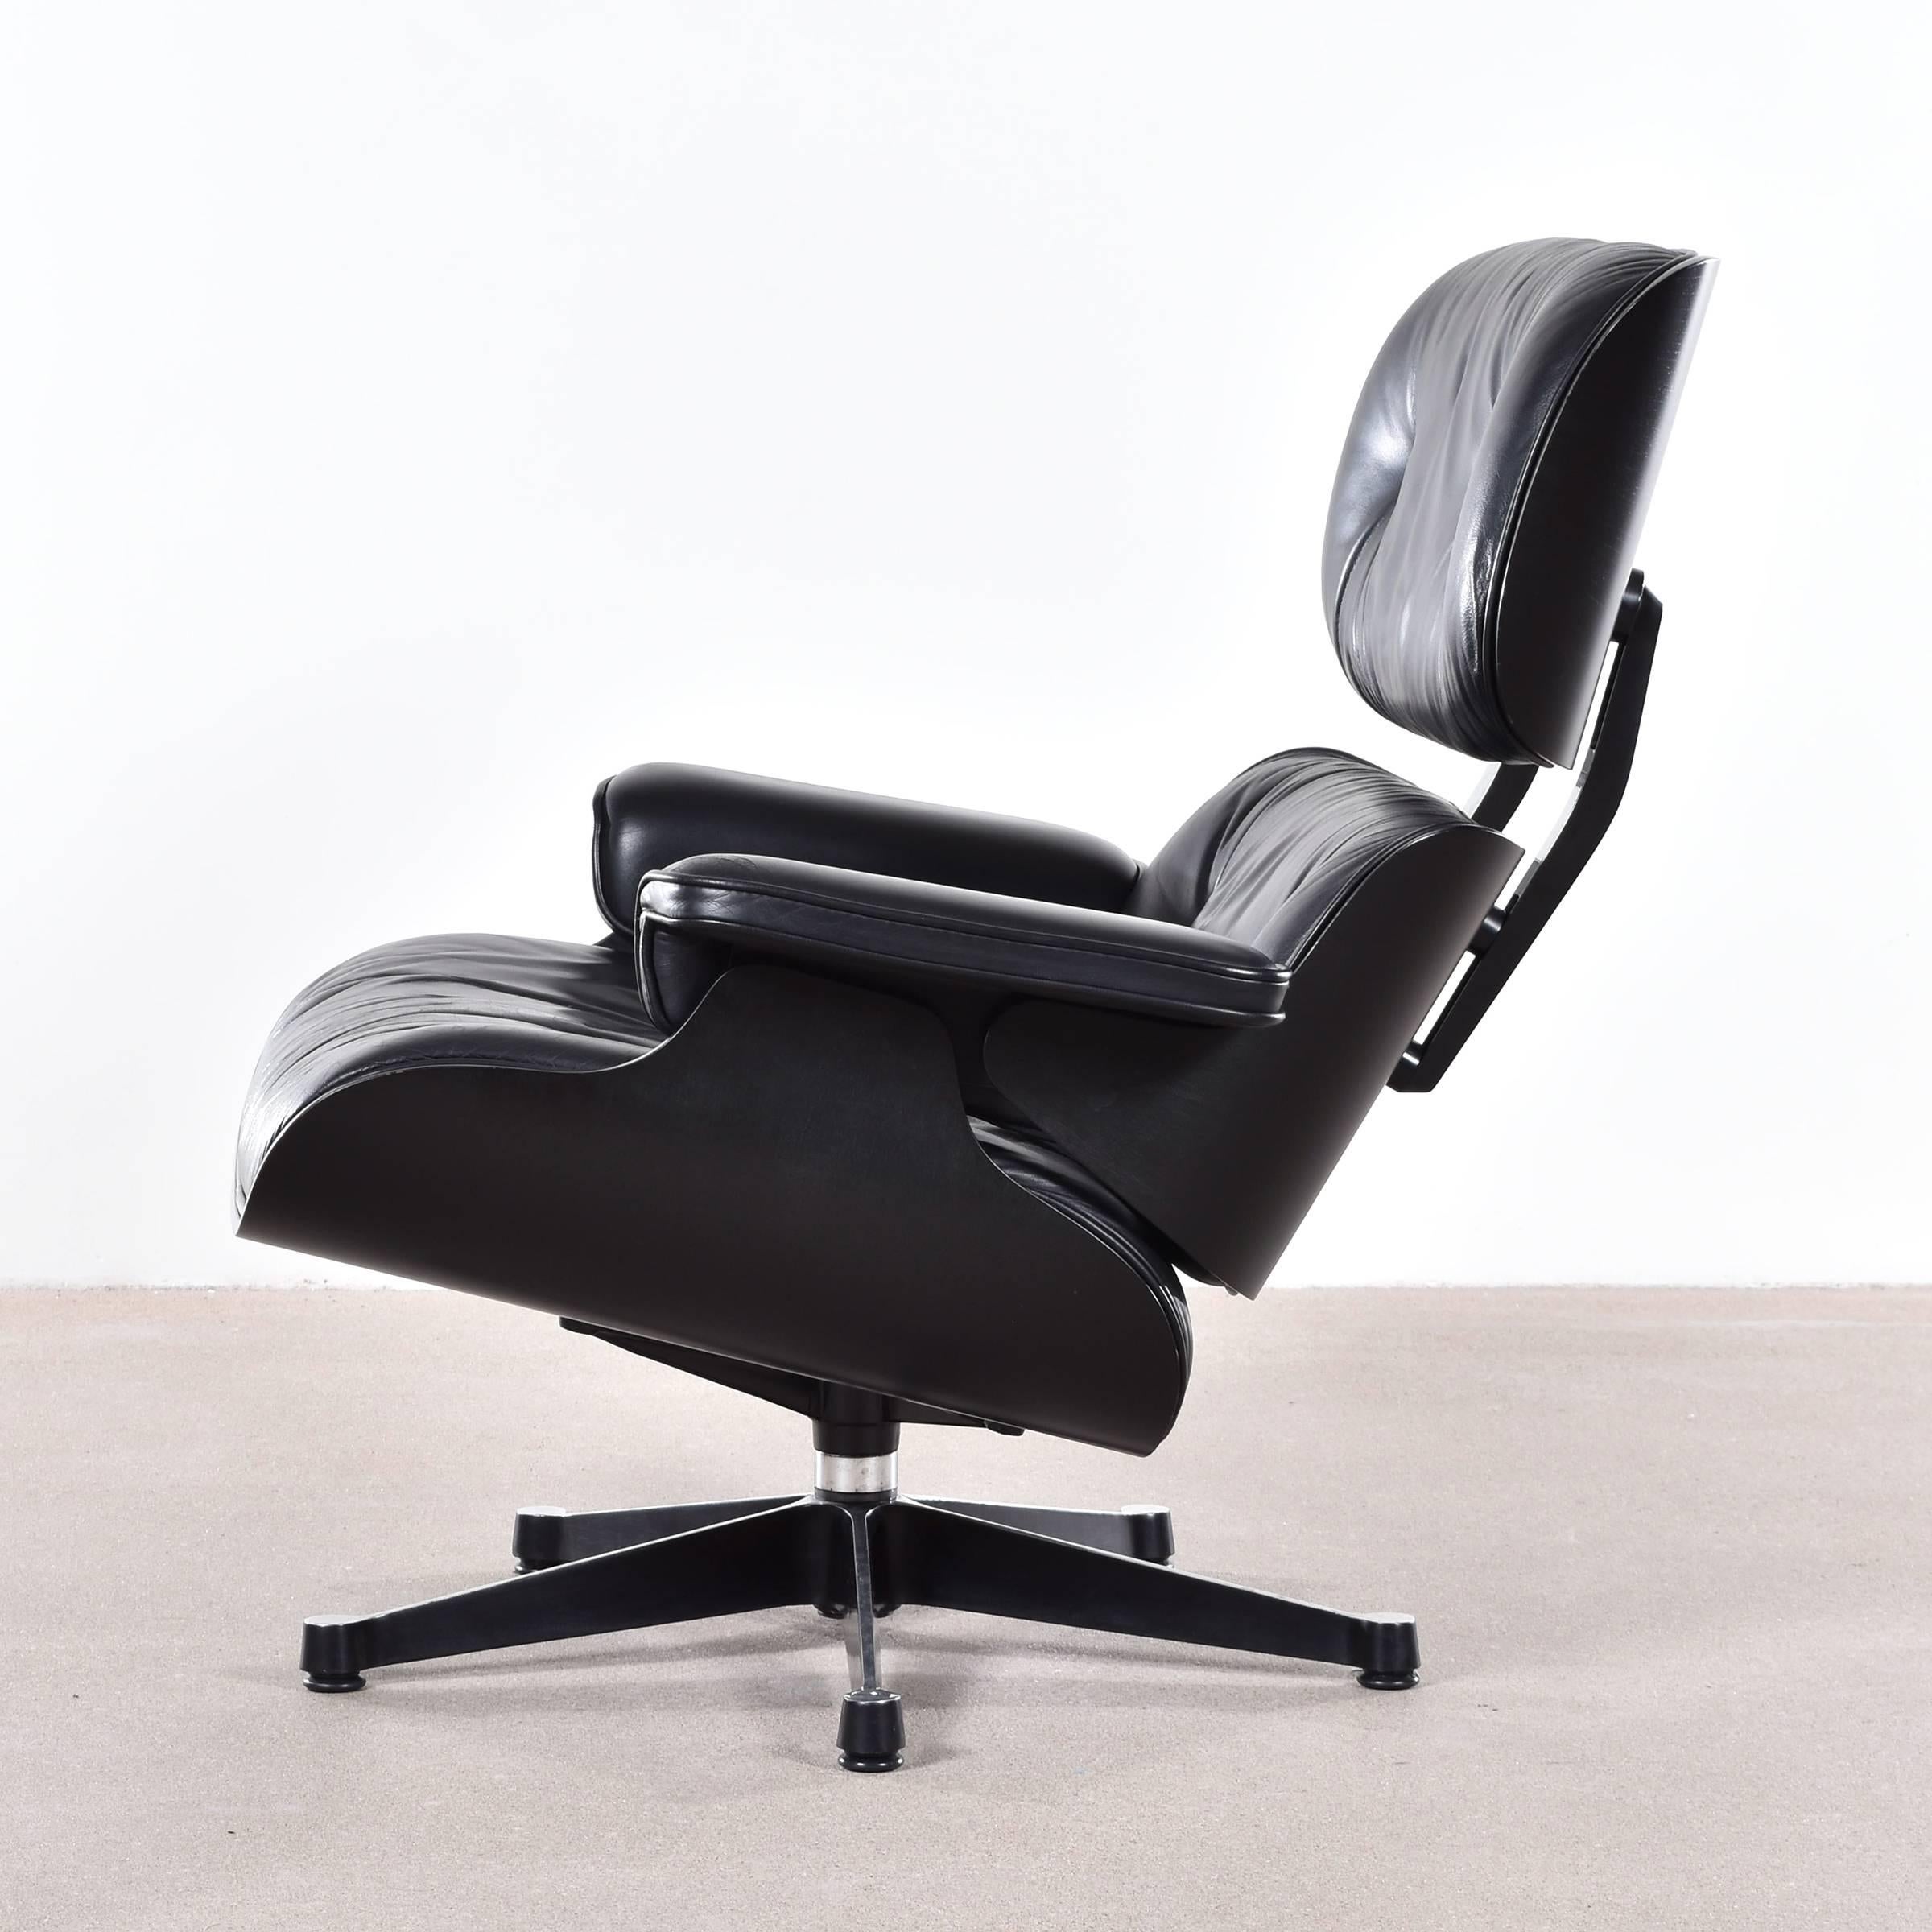 Iconic lounge chair in black leather and black plywood shells. Very good original condition. Signed with manufacturer's stickers.

Free shipping for European destinations!

We strive for a high level of service and offer: White glove shipping,